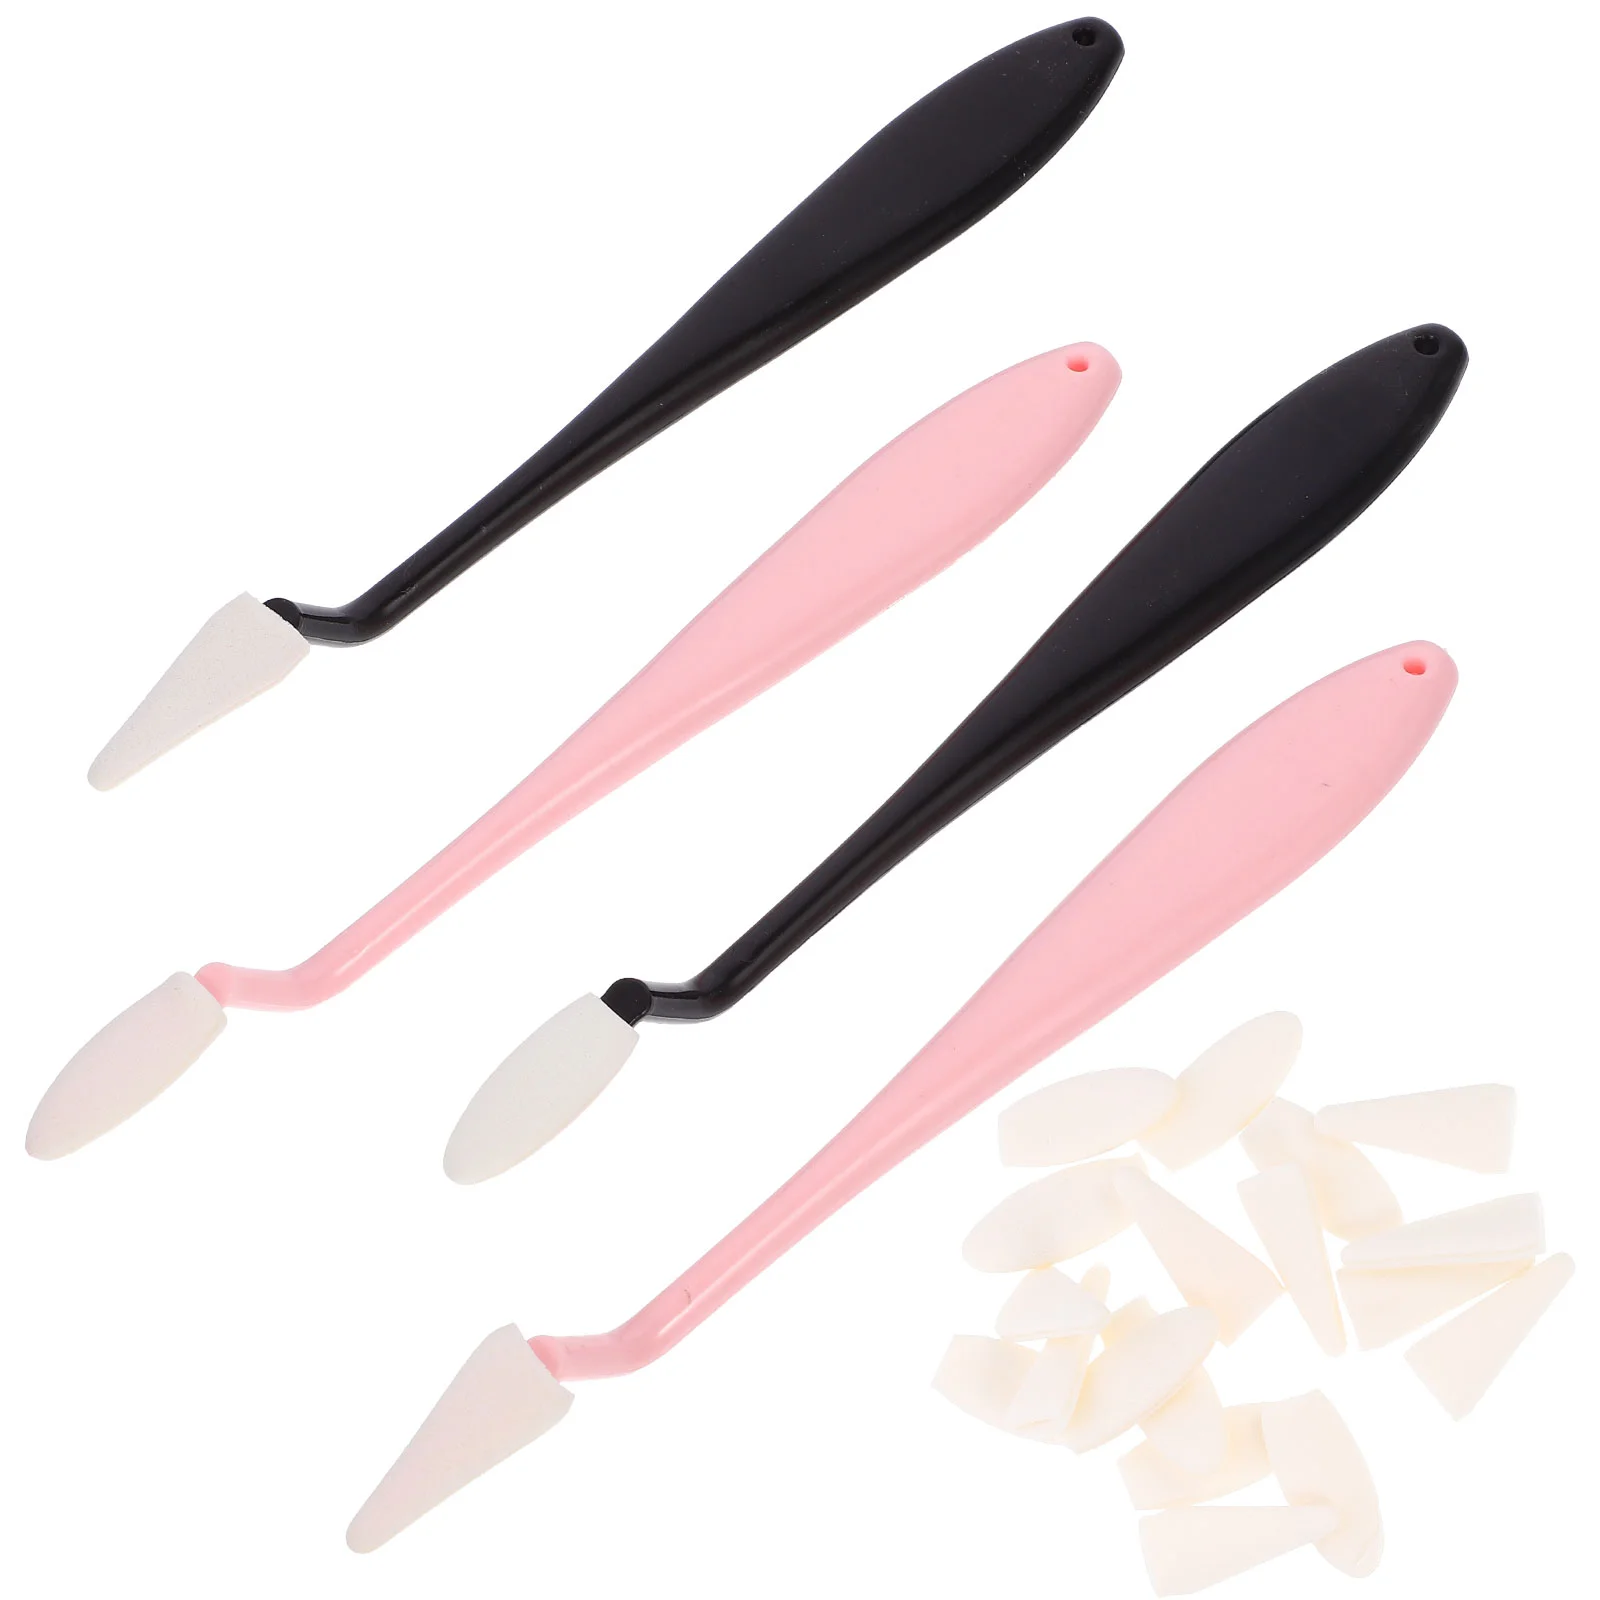 4pcs Sketch Sponge Wiper Blender Set Students Sketching Drawing Clean Tools sketch eraser sketching tools smudge drawing supplies blooming wiper heads abs replace